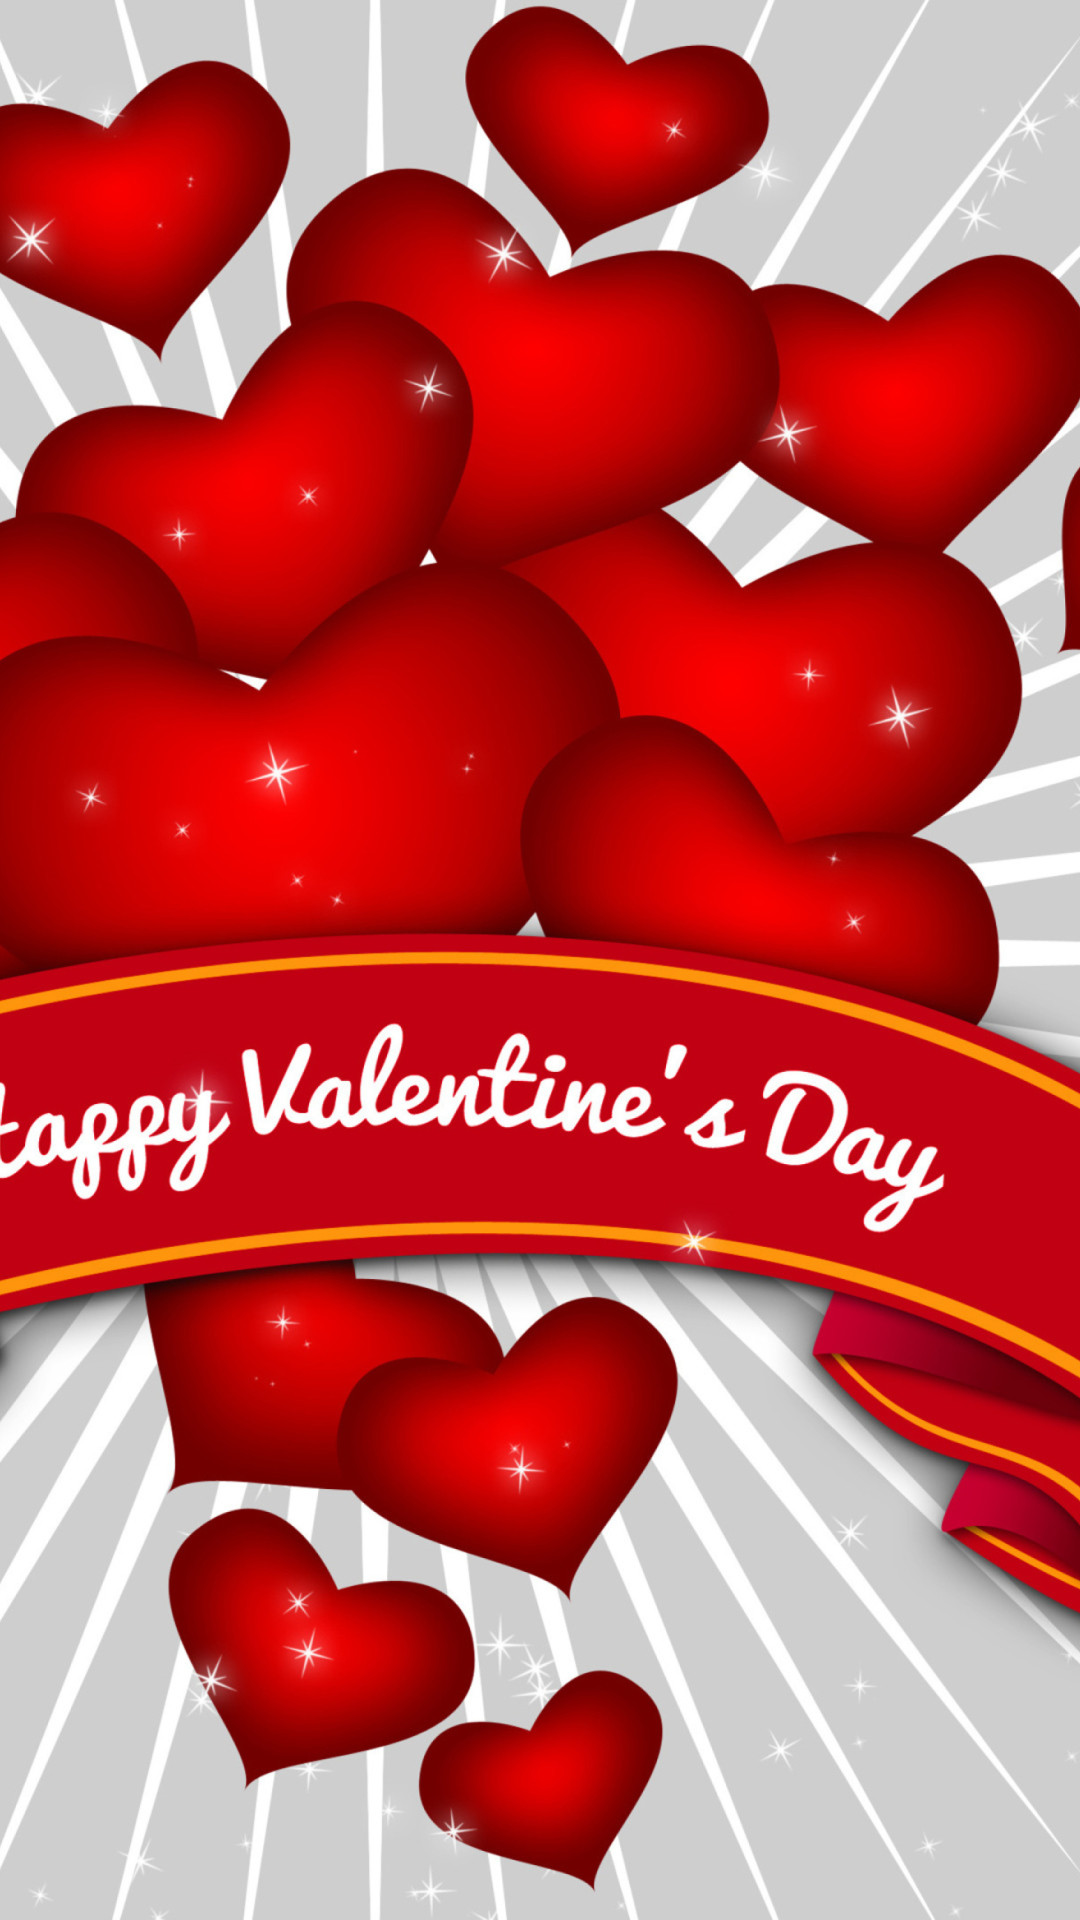 Full HD Valentines Day Wallpaper iPhone